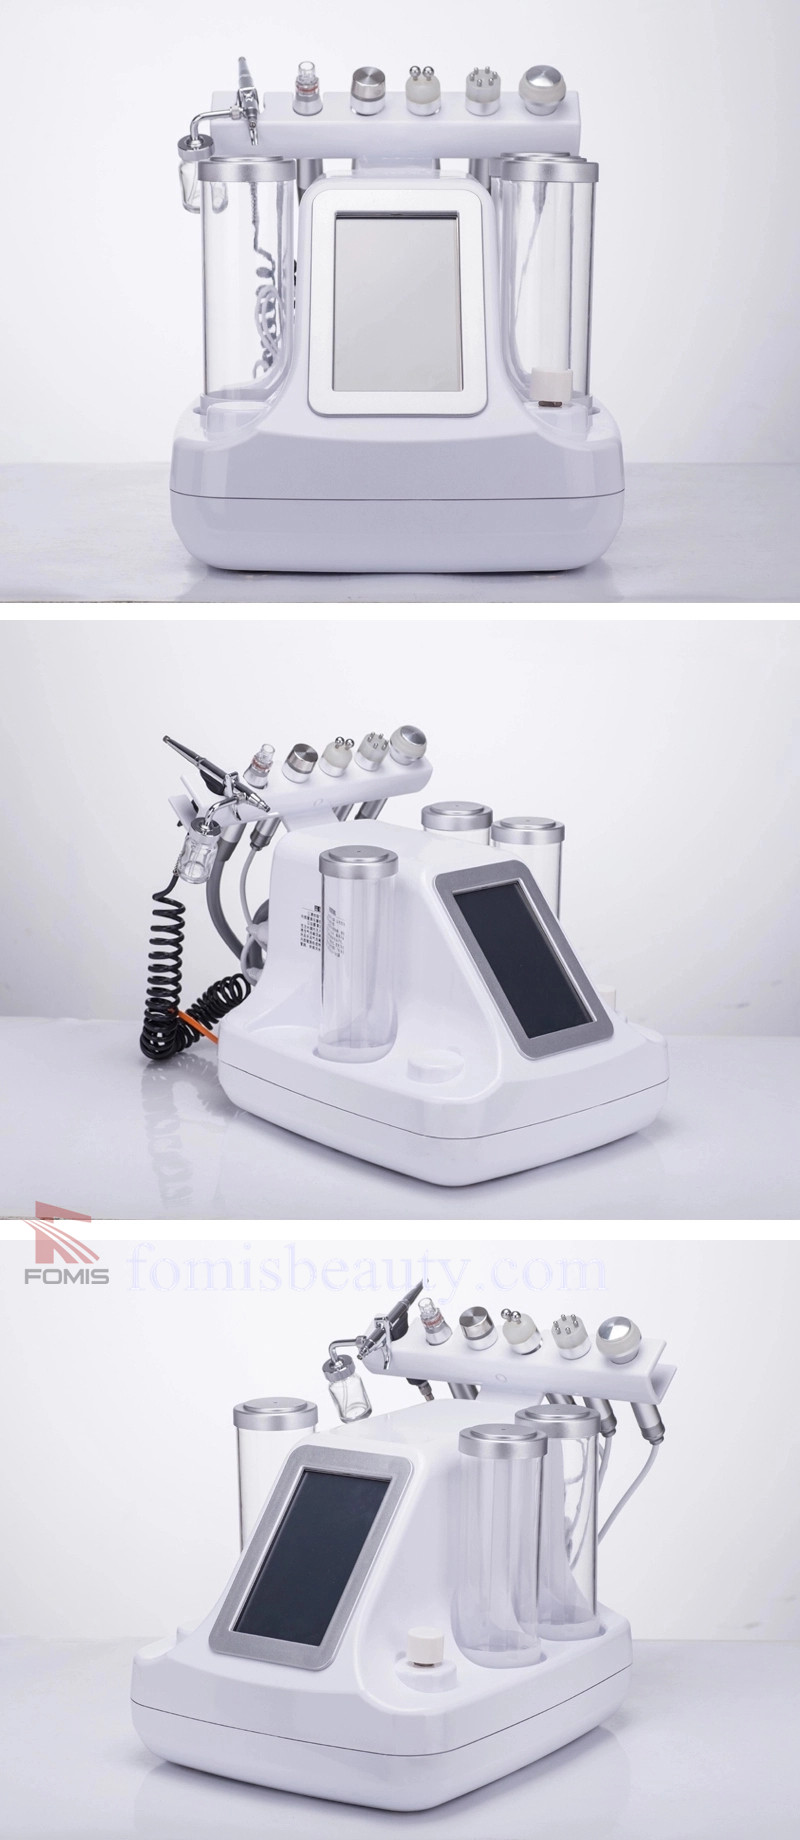 6 in 1 Hydra oxygen facial care Beauty Device